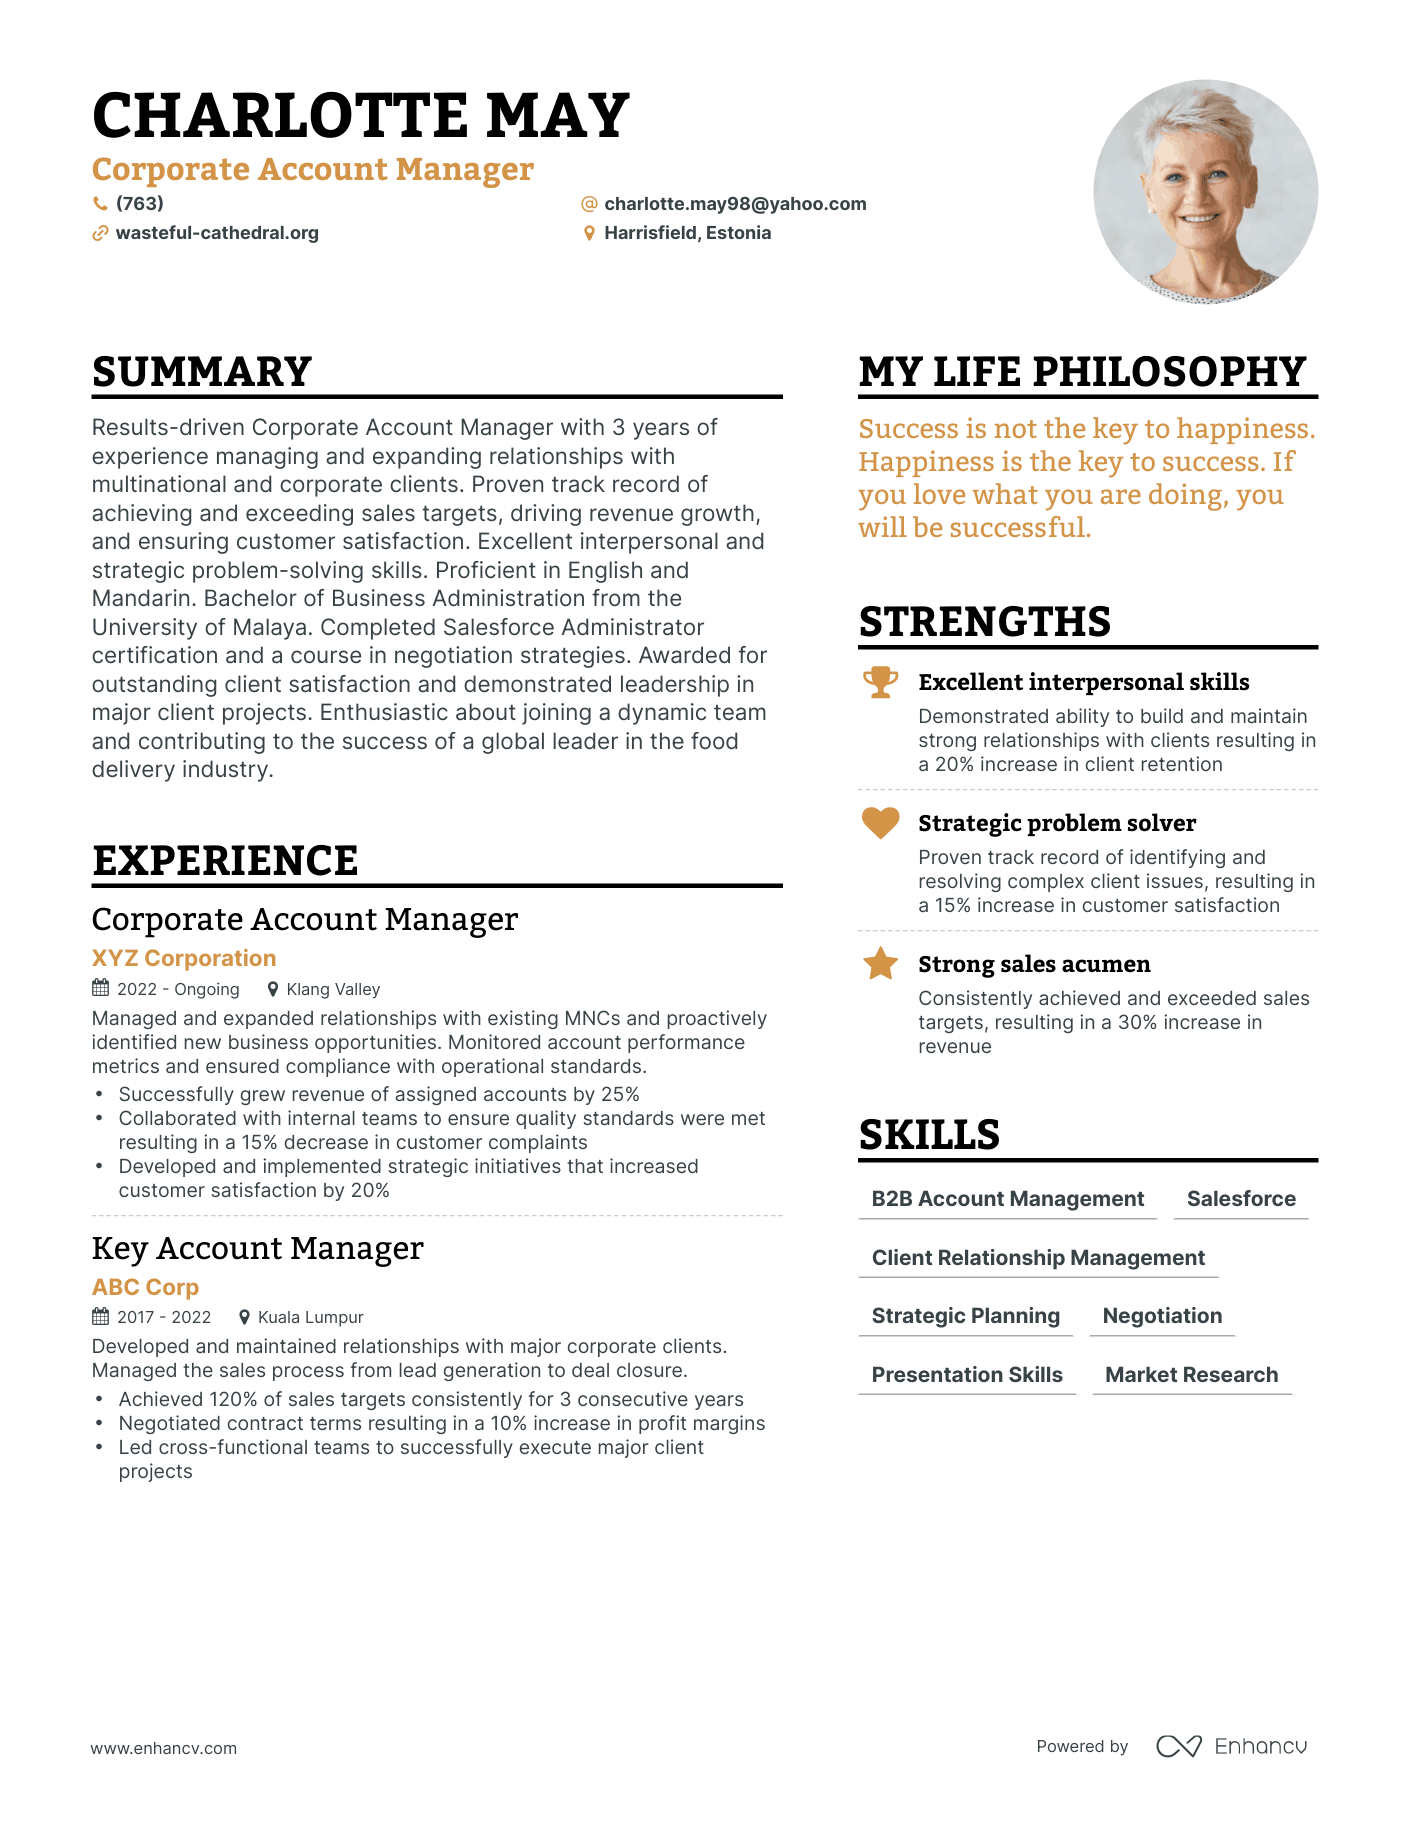 Corporate Account Manager resume example